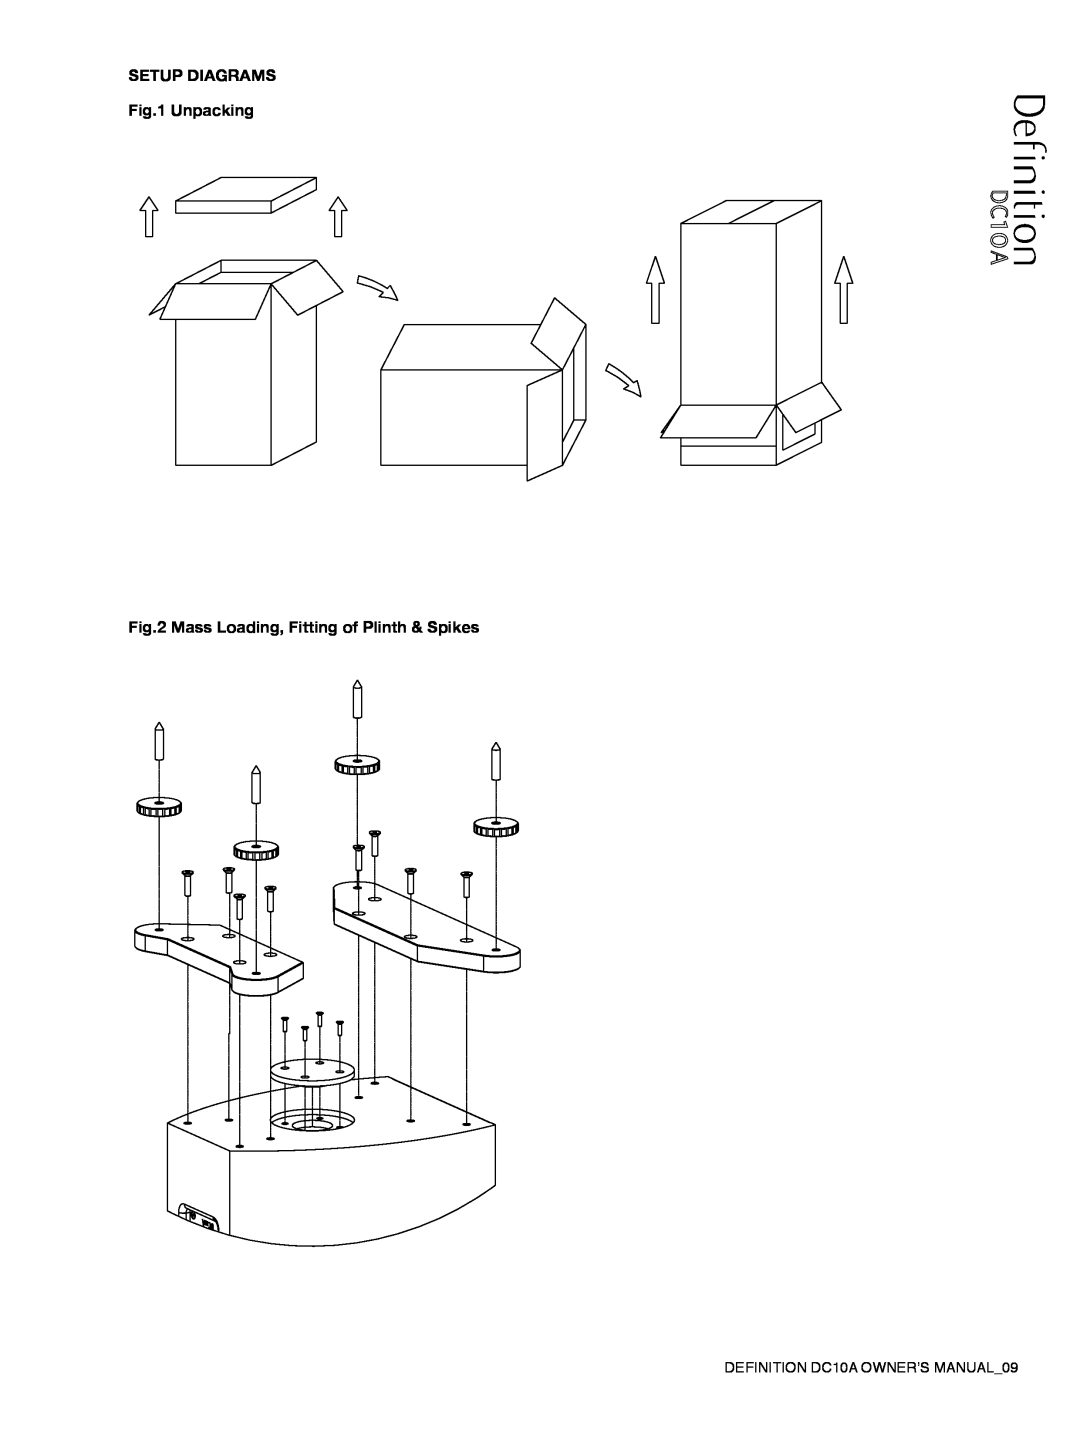 Tannoy DC10A owner manual SETUP DIAGRAMS Unpacking, Mass Loading, Fitting of Plinth & Spikes 